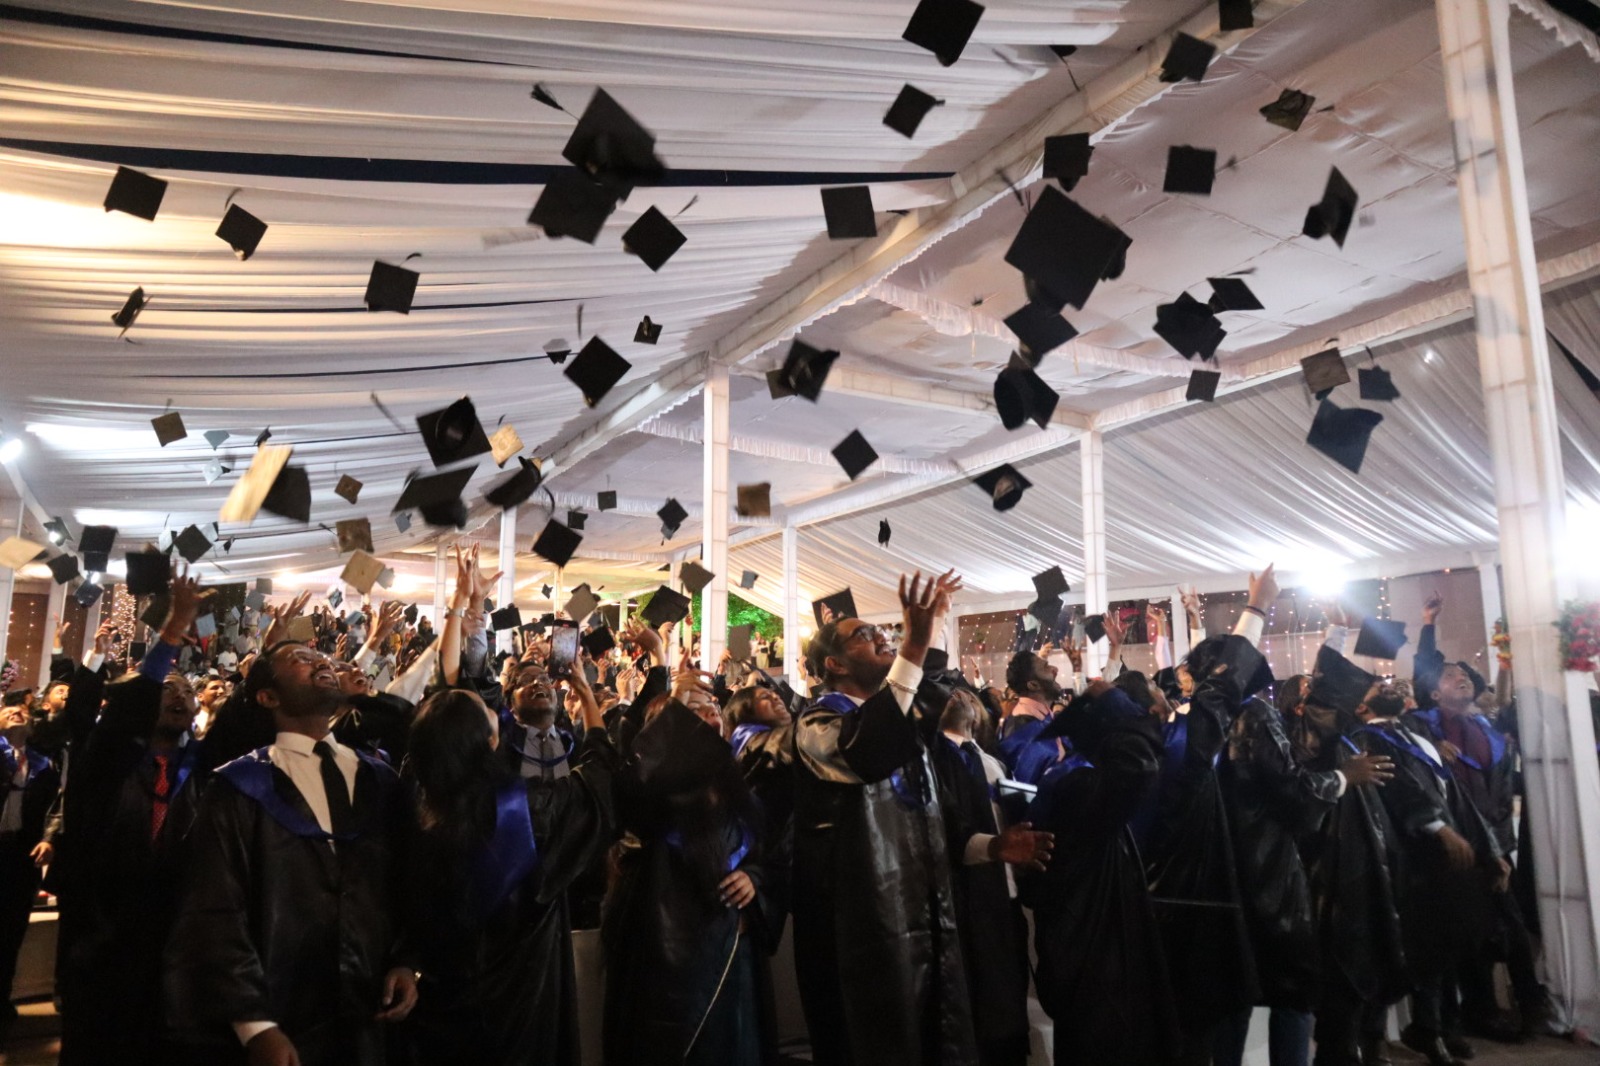 IIM Udaipur Awards MBA Degrees to 398 students At Its 11th Annual Convocation decoding=